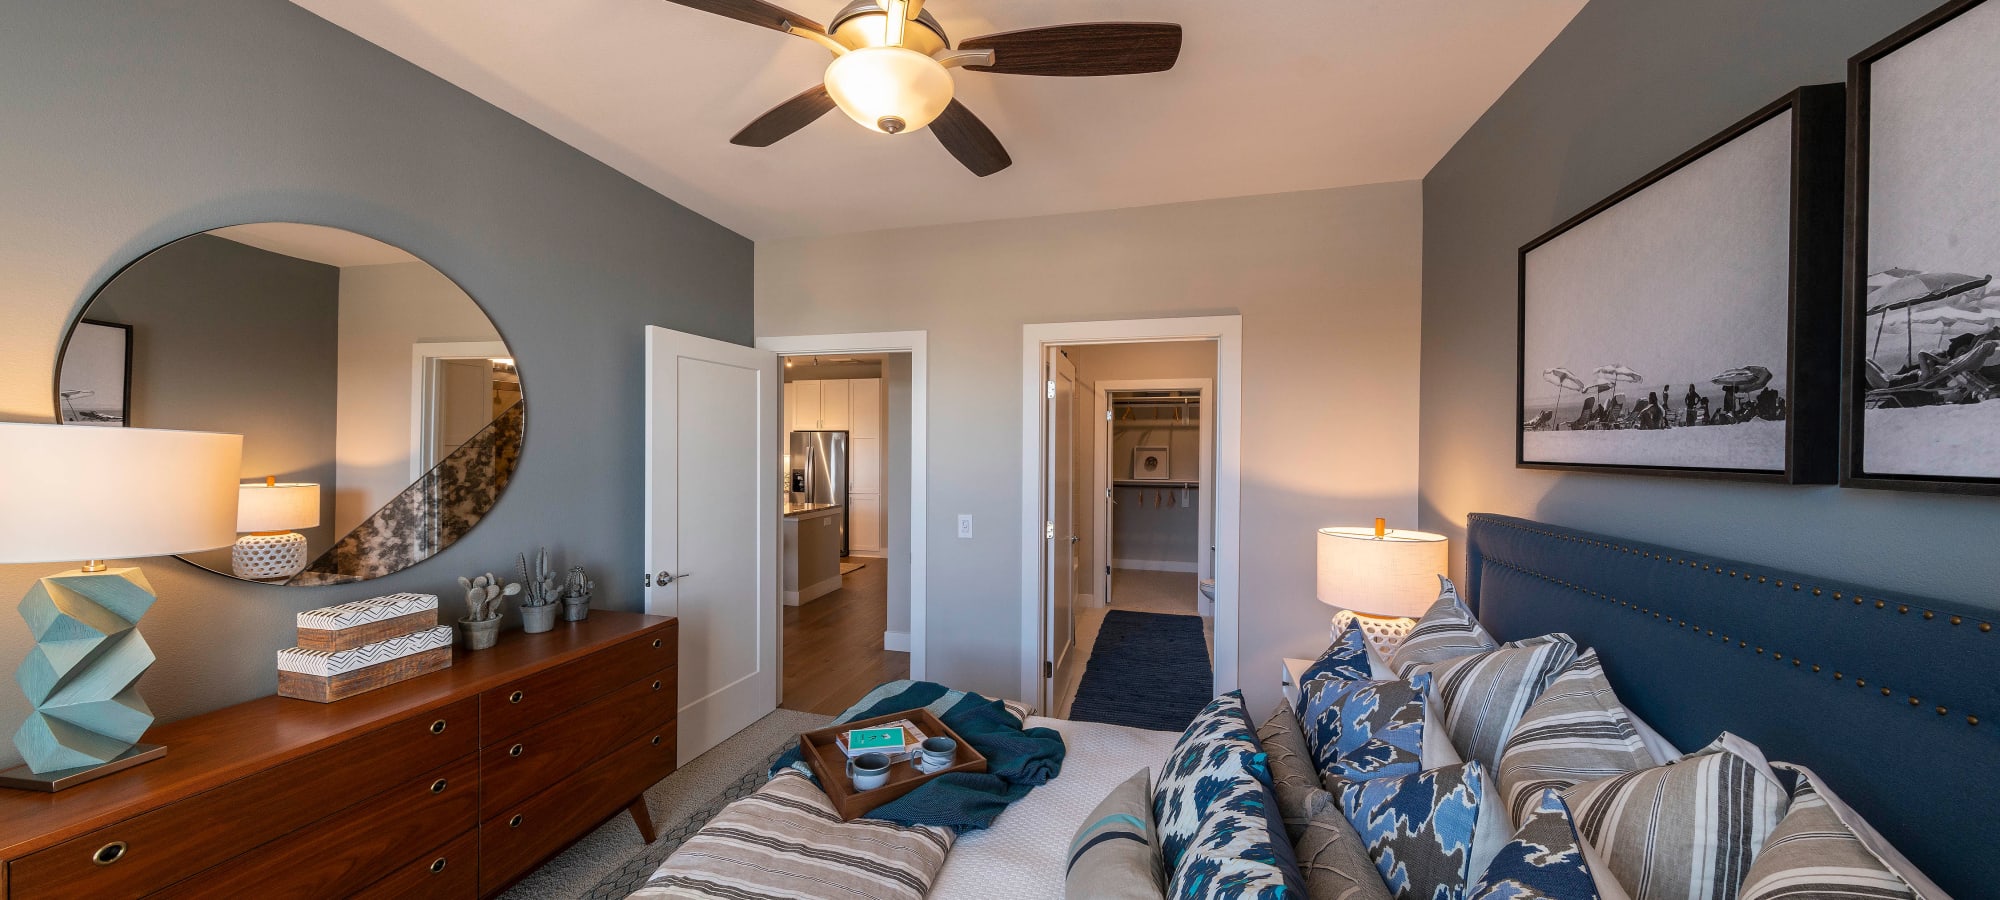 Primary  bedroom with an accent wall and a ceiling fan in a model home at Carter in Scottsdale, Arizona